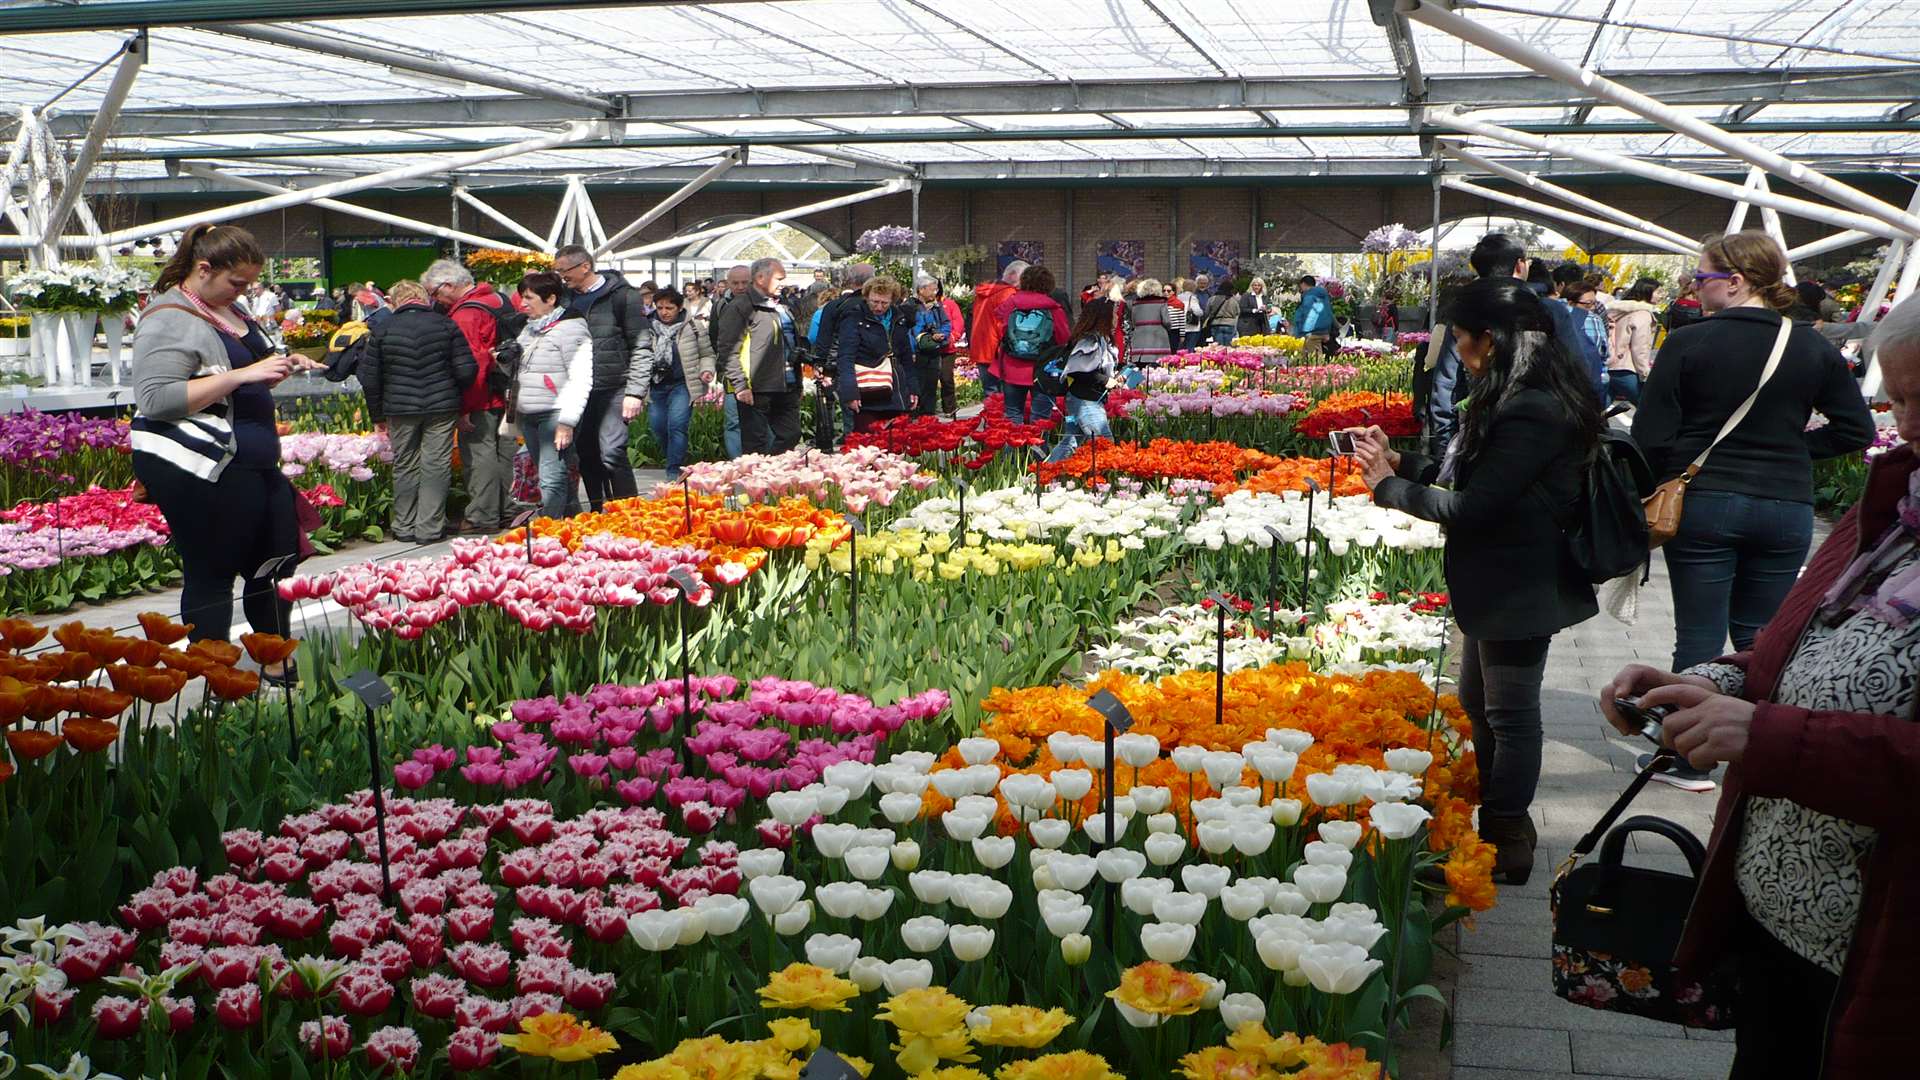 The world-famous Keukenhof flower festival has more than seven million tulips, daffodils and hyacinths on show between March and May